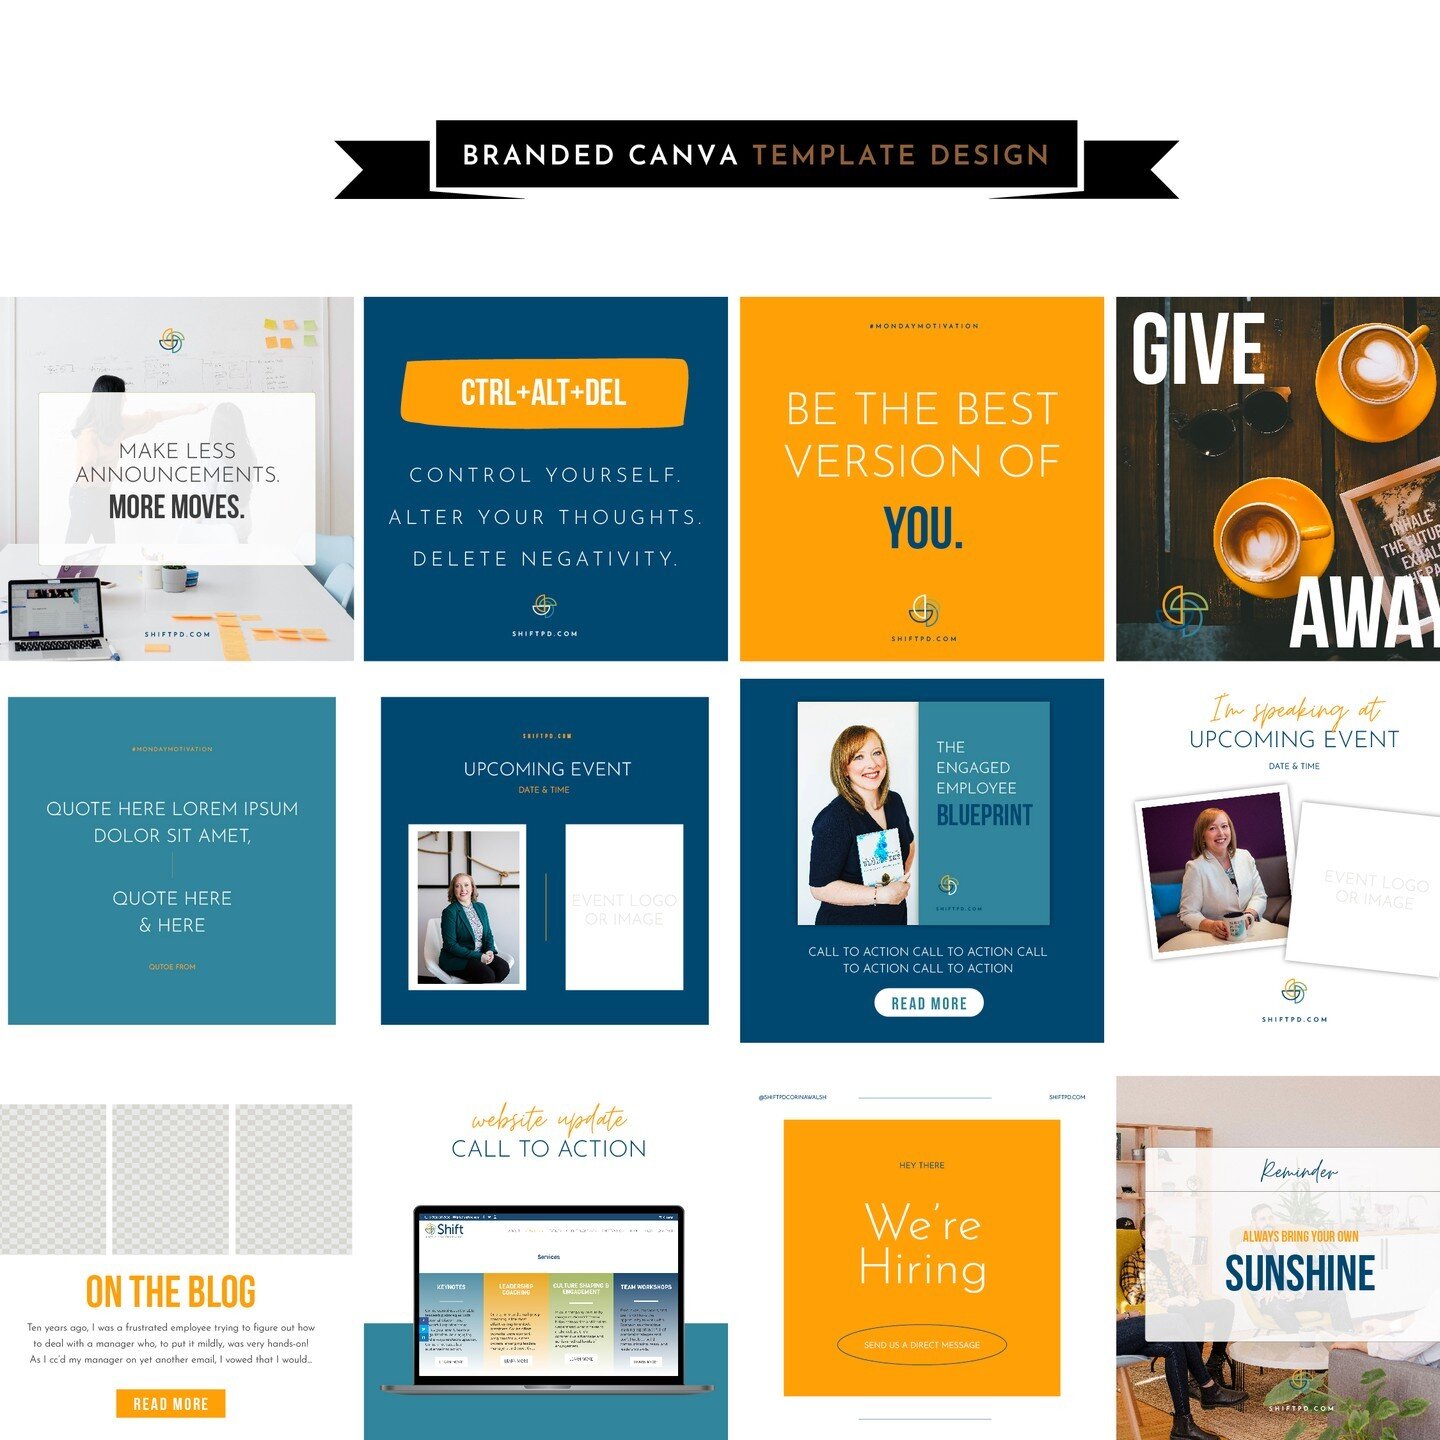 Client Feature Today: Shift People Development (she's on the East Coast!)
.
Did you know we offer branded Canva templates? Here is an example of what they can look like....🧡